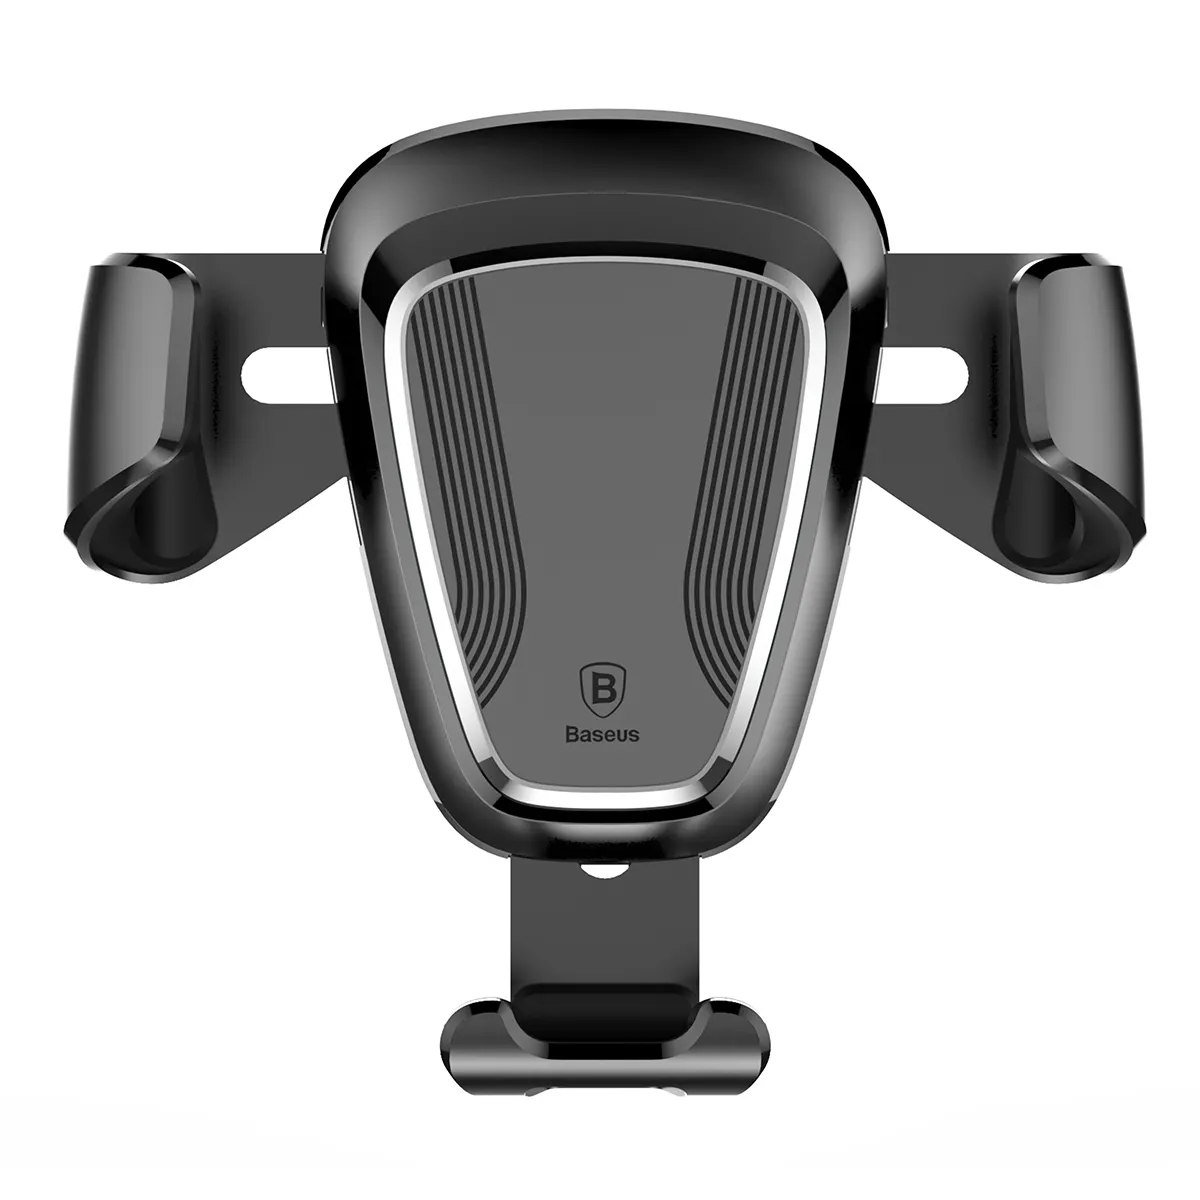 BASEUS Gravity Car Mount Rotation Car Air Vent Mount Holder Support pour iPhone Samsung Huawei